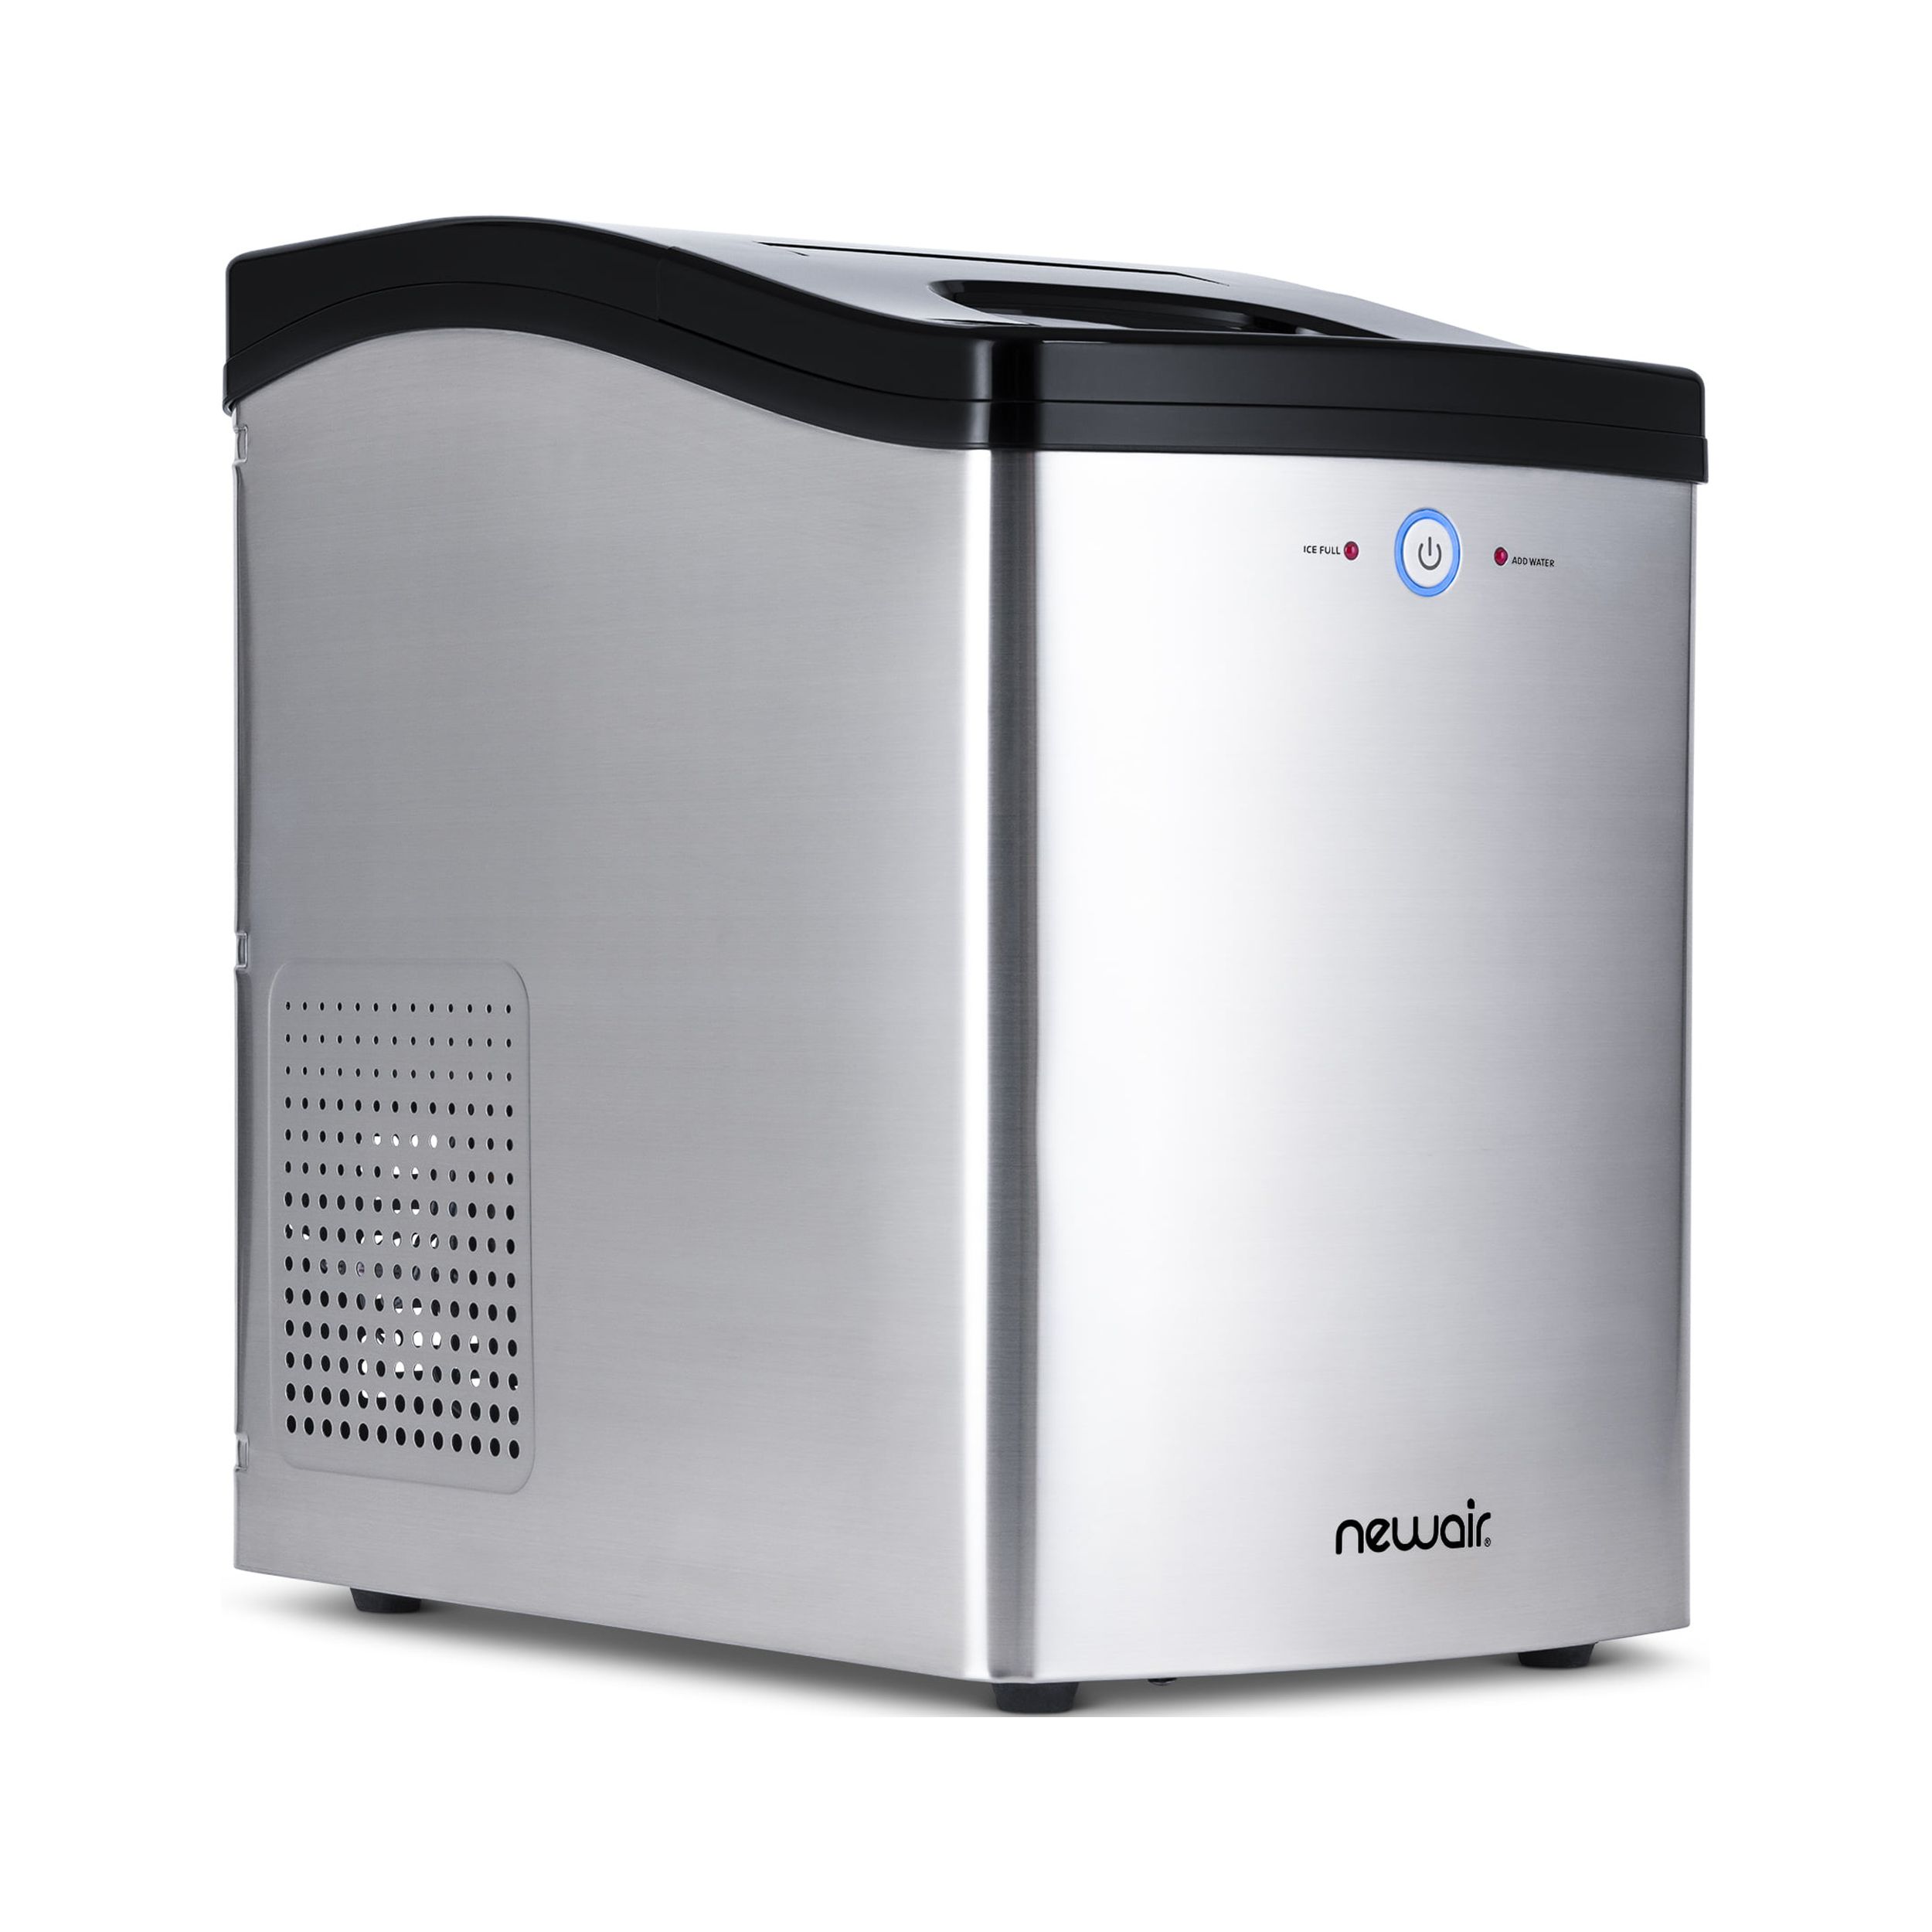 Newair 40 lb. Countertop Nugget Ice Maker in Stainless Steel - NIM040SS00 - image 1 of 16